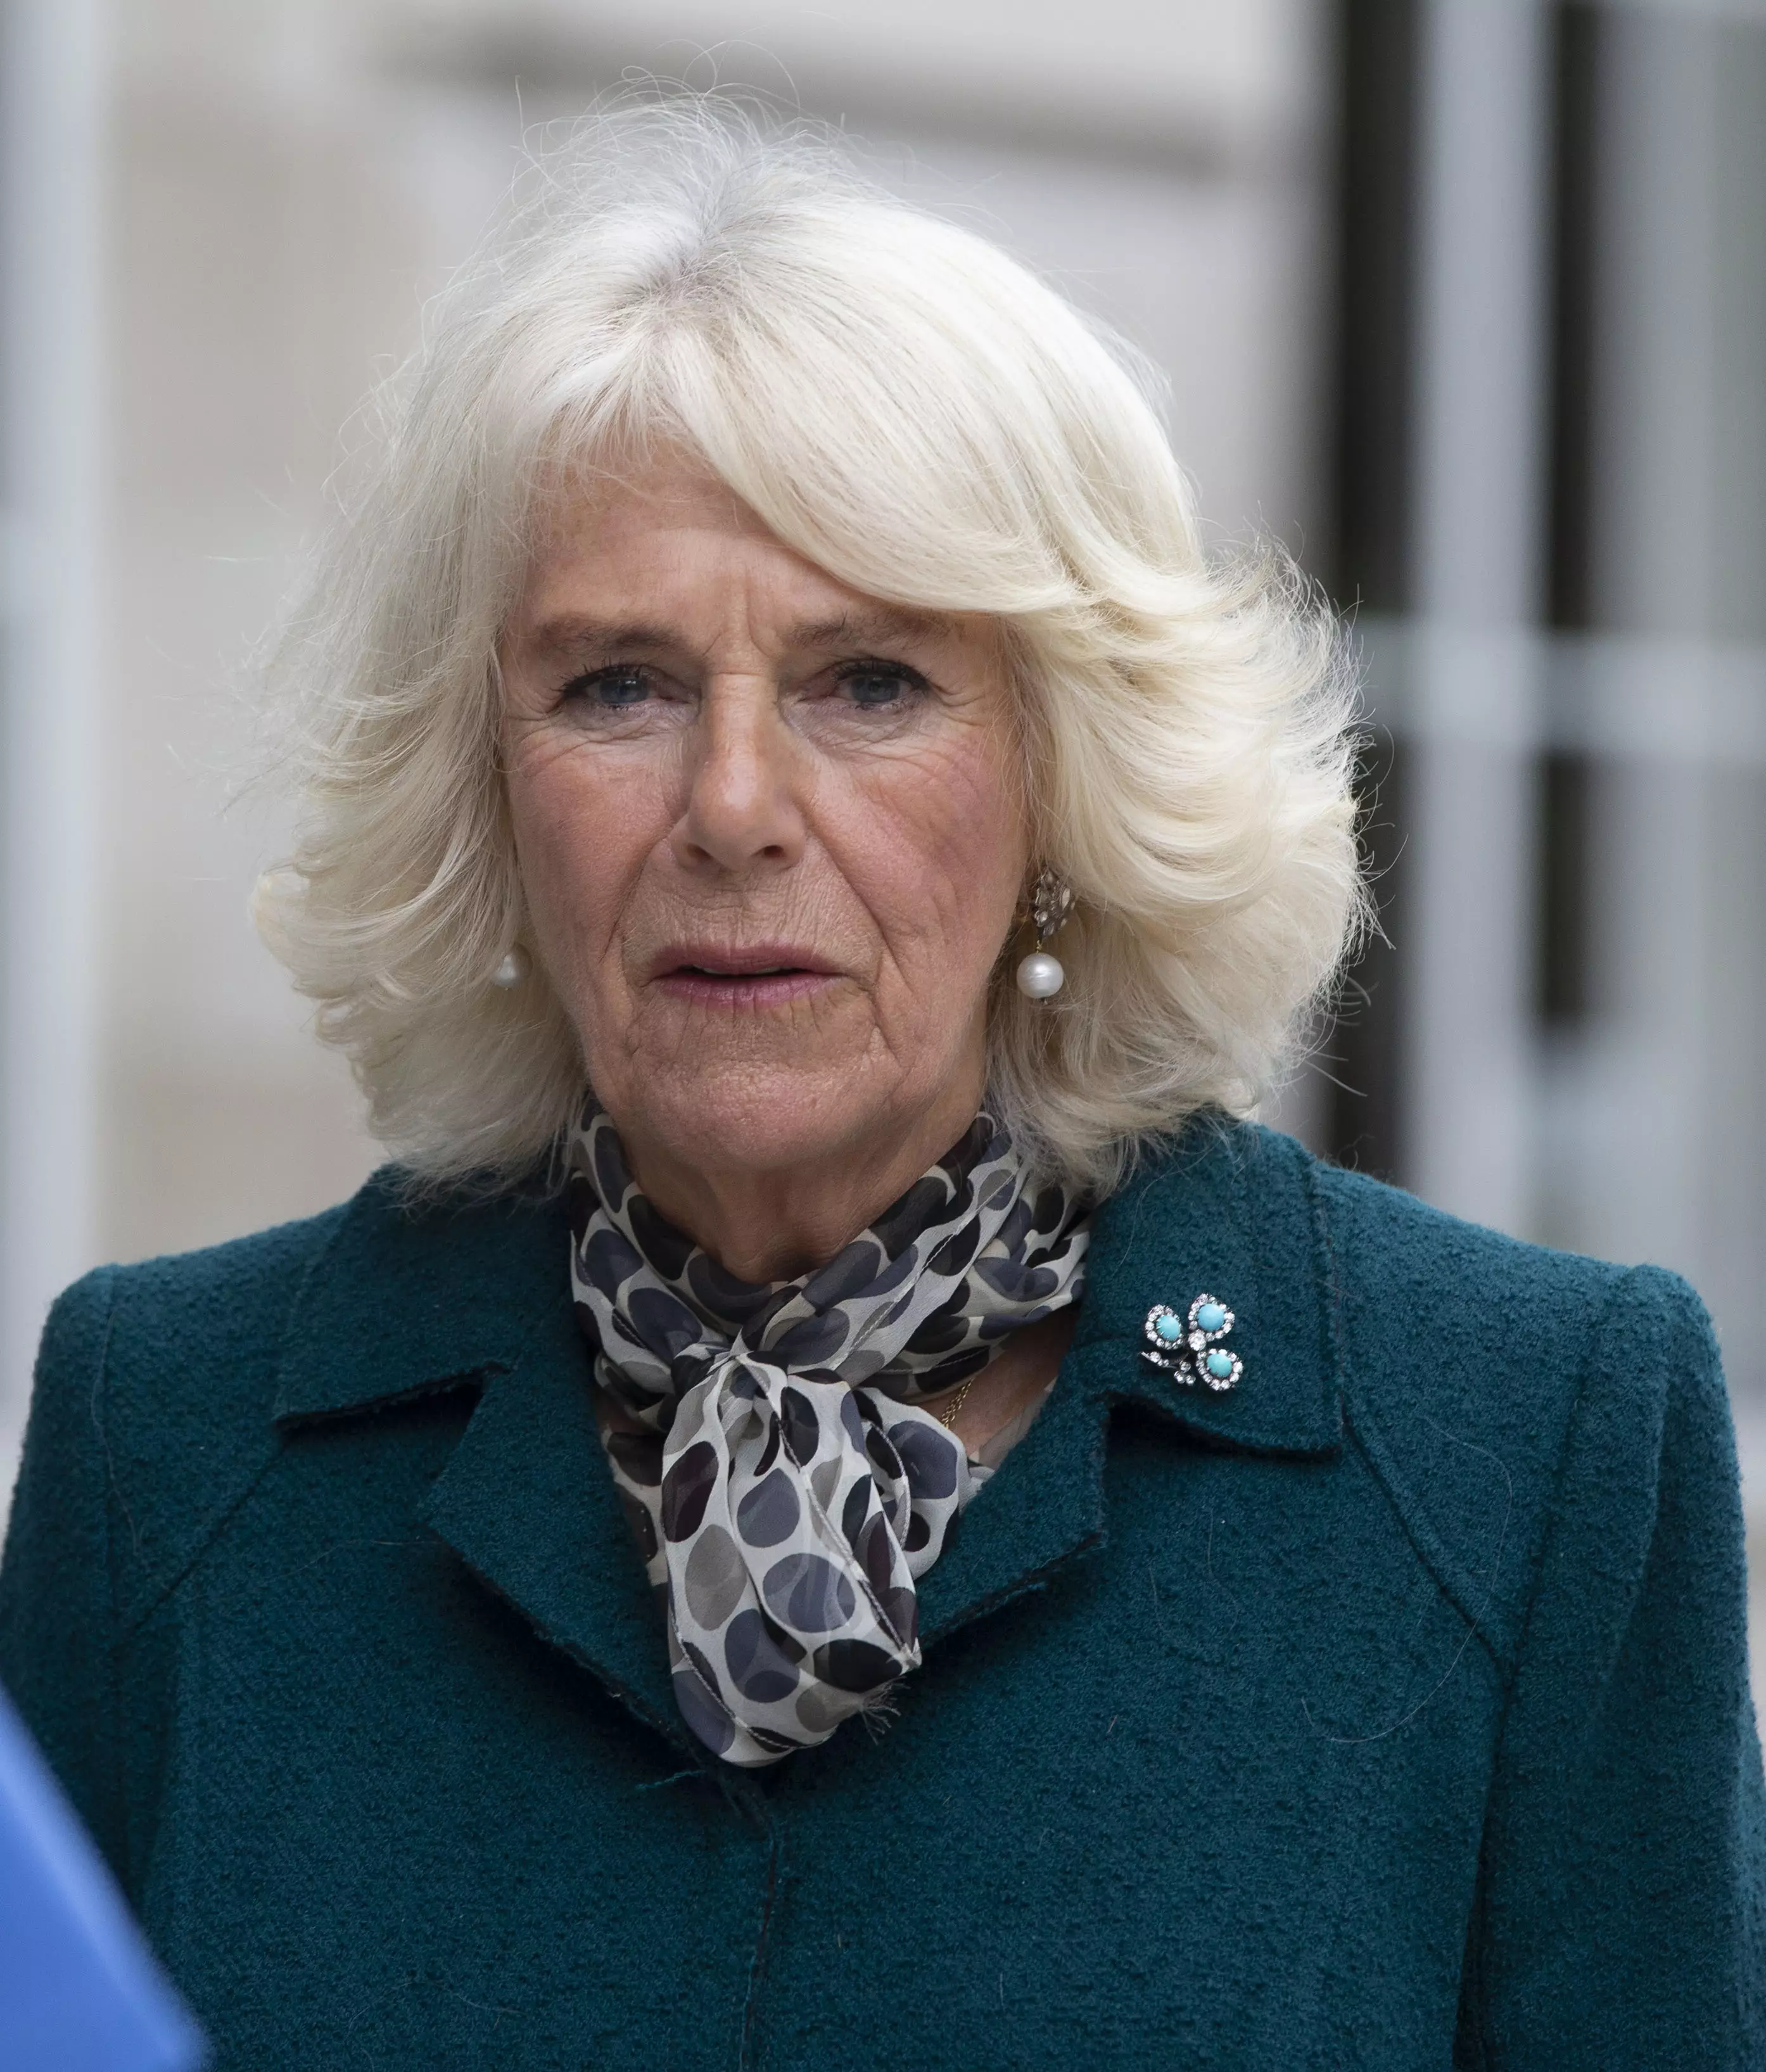 Camilla, Duchess of Cornwall, has been subject to some upsetting online abuse from viewers who watched the show (